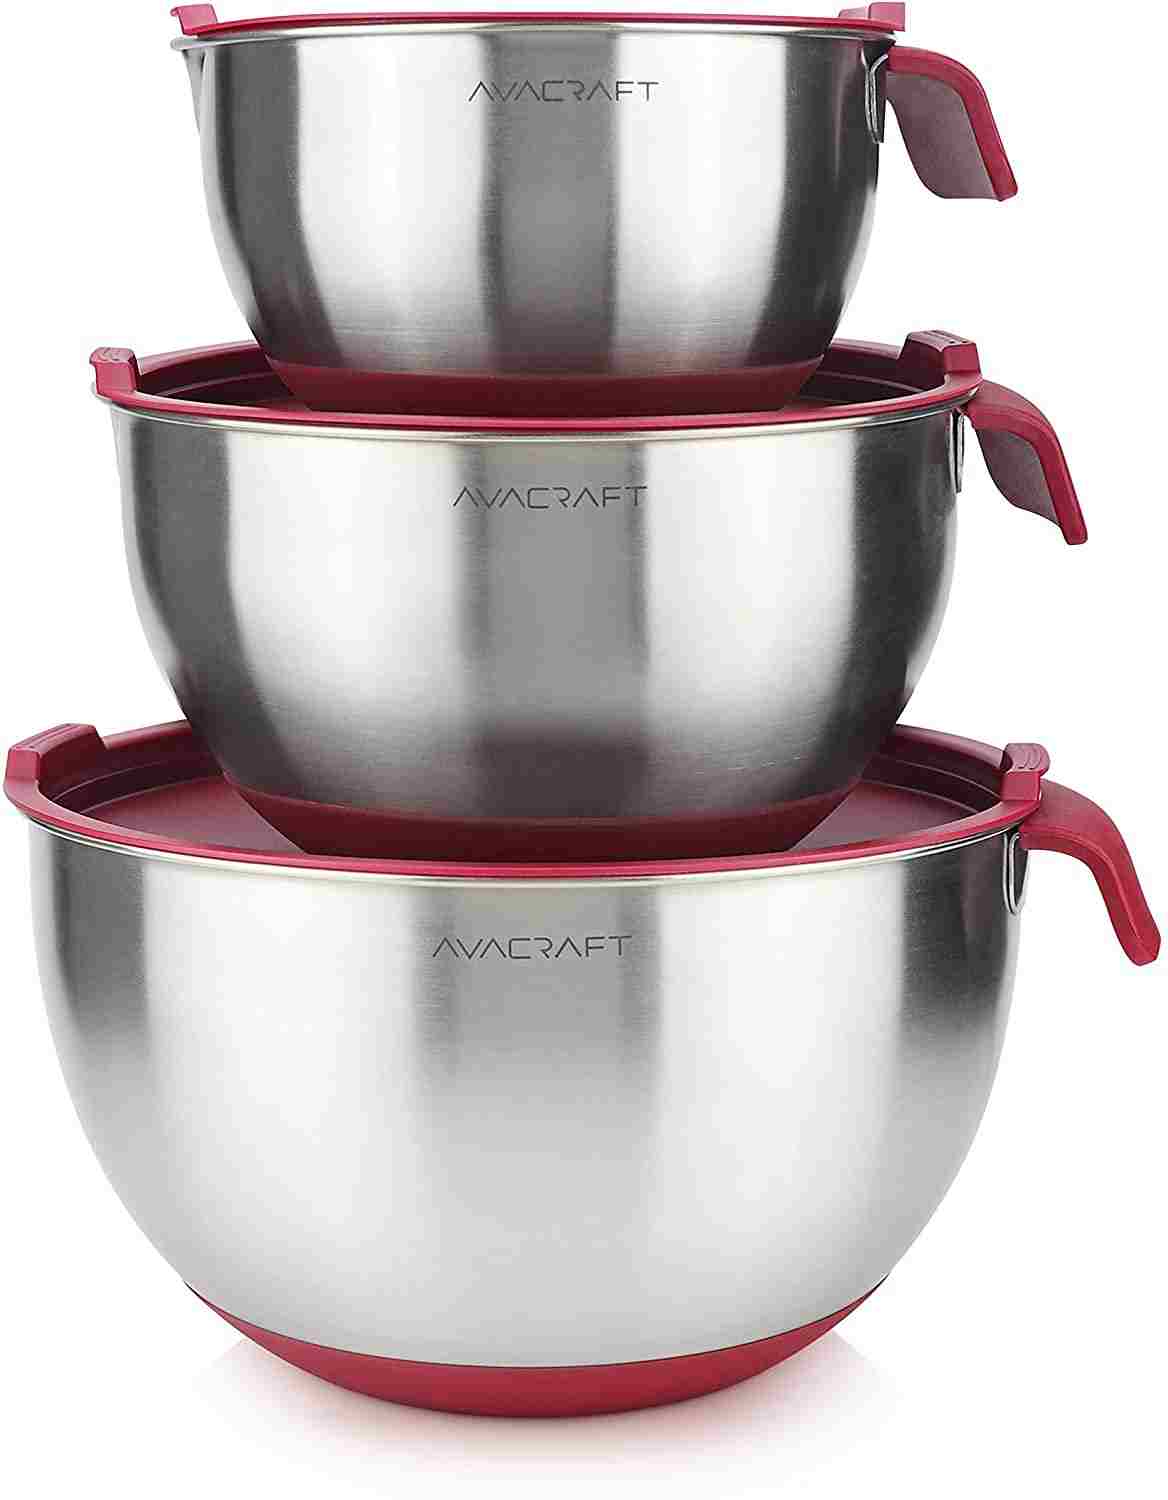 Avacraft Stainless Steel Non-slip Mixing Bowls